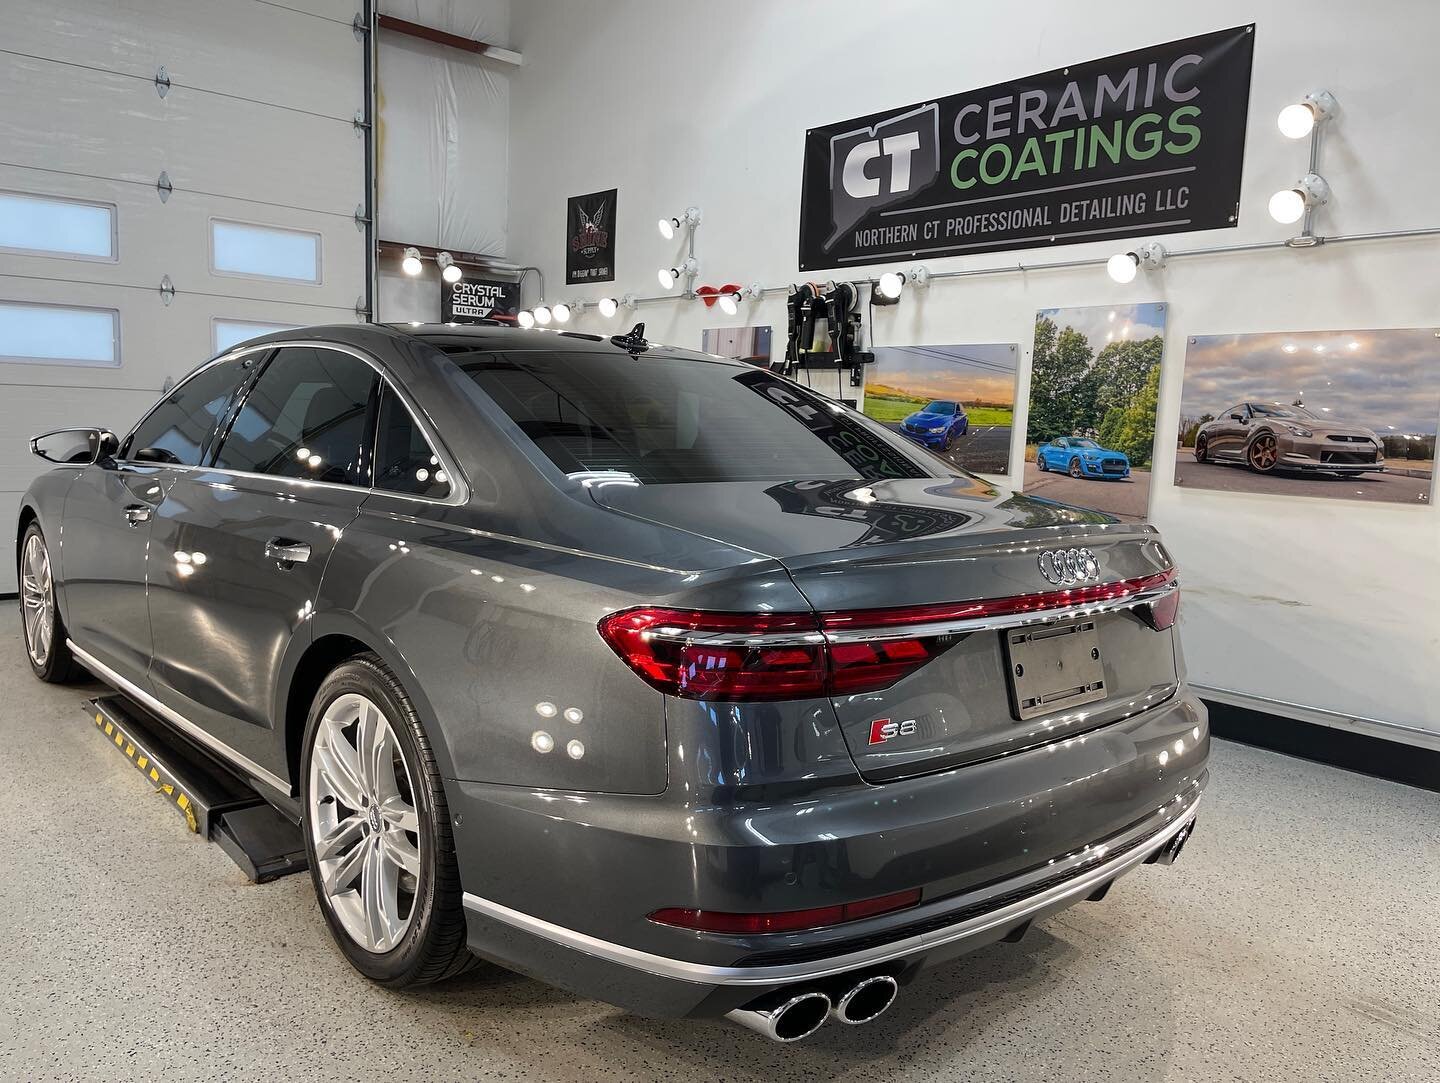 Level 3 + Tints
2021 Audi S8

Our level 3 package is our signature and top tier package where we go after all of the paint defects possible with multiple paint correction steps to achieve the best finish possible. 

Once paint is corrected to our sta